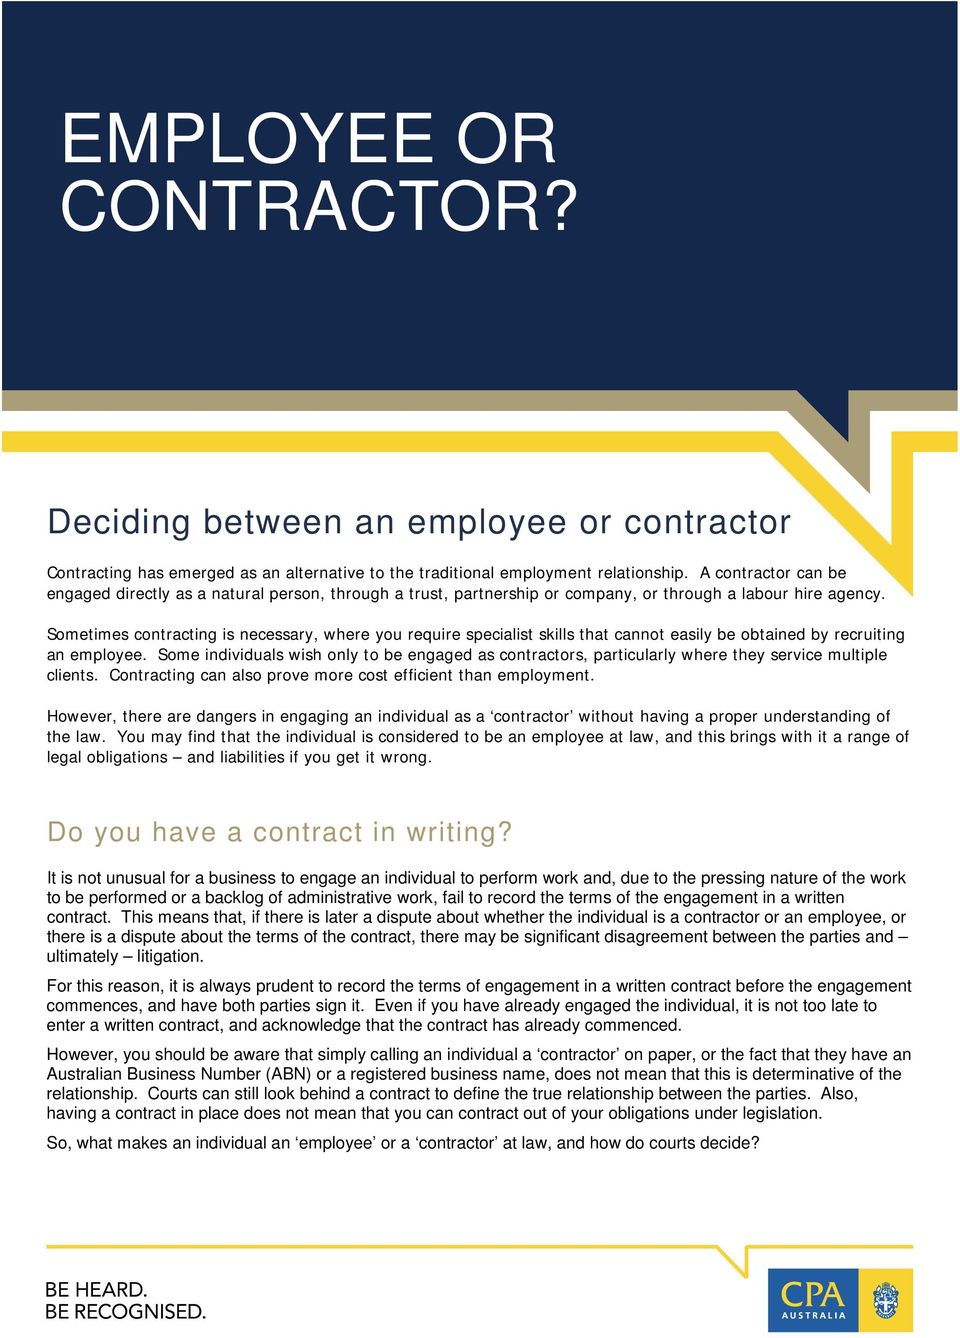 Sometimes contracting is necessary, where you require specialist skills that cannot easily be obtained by recruiting an employee.